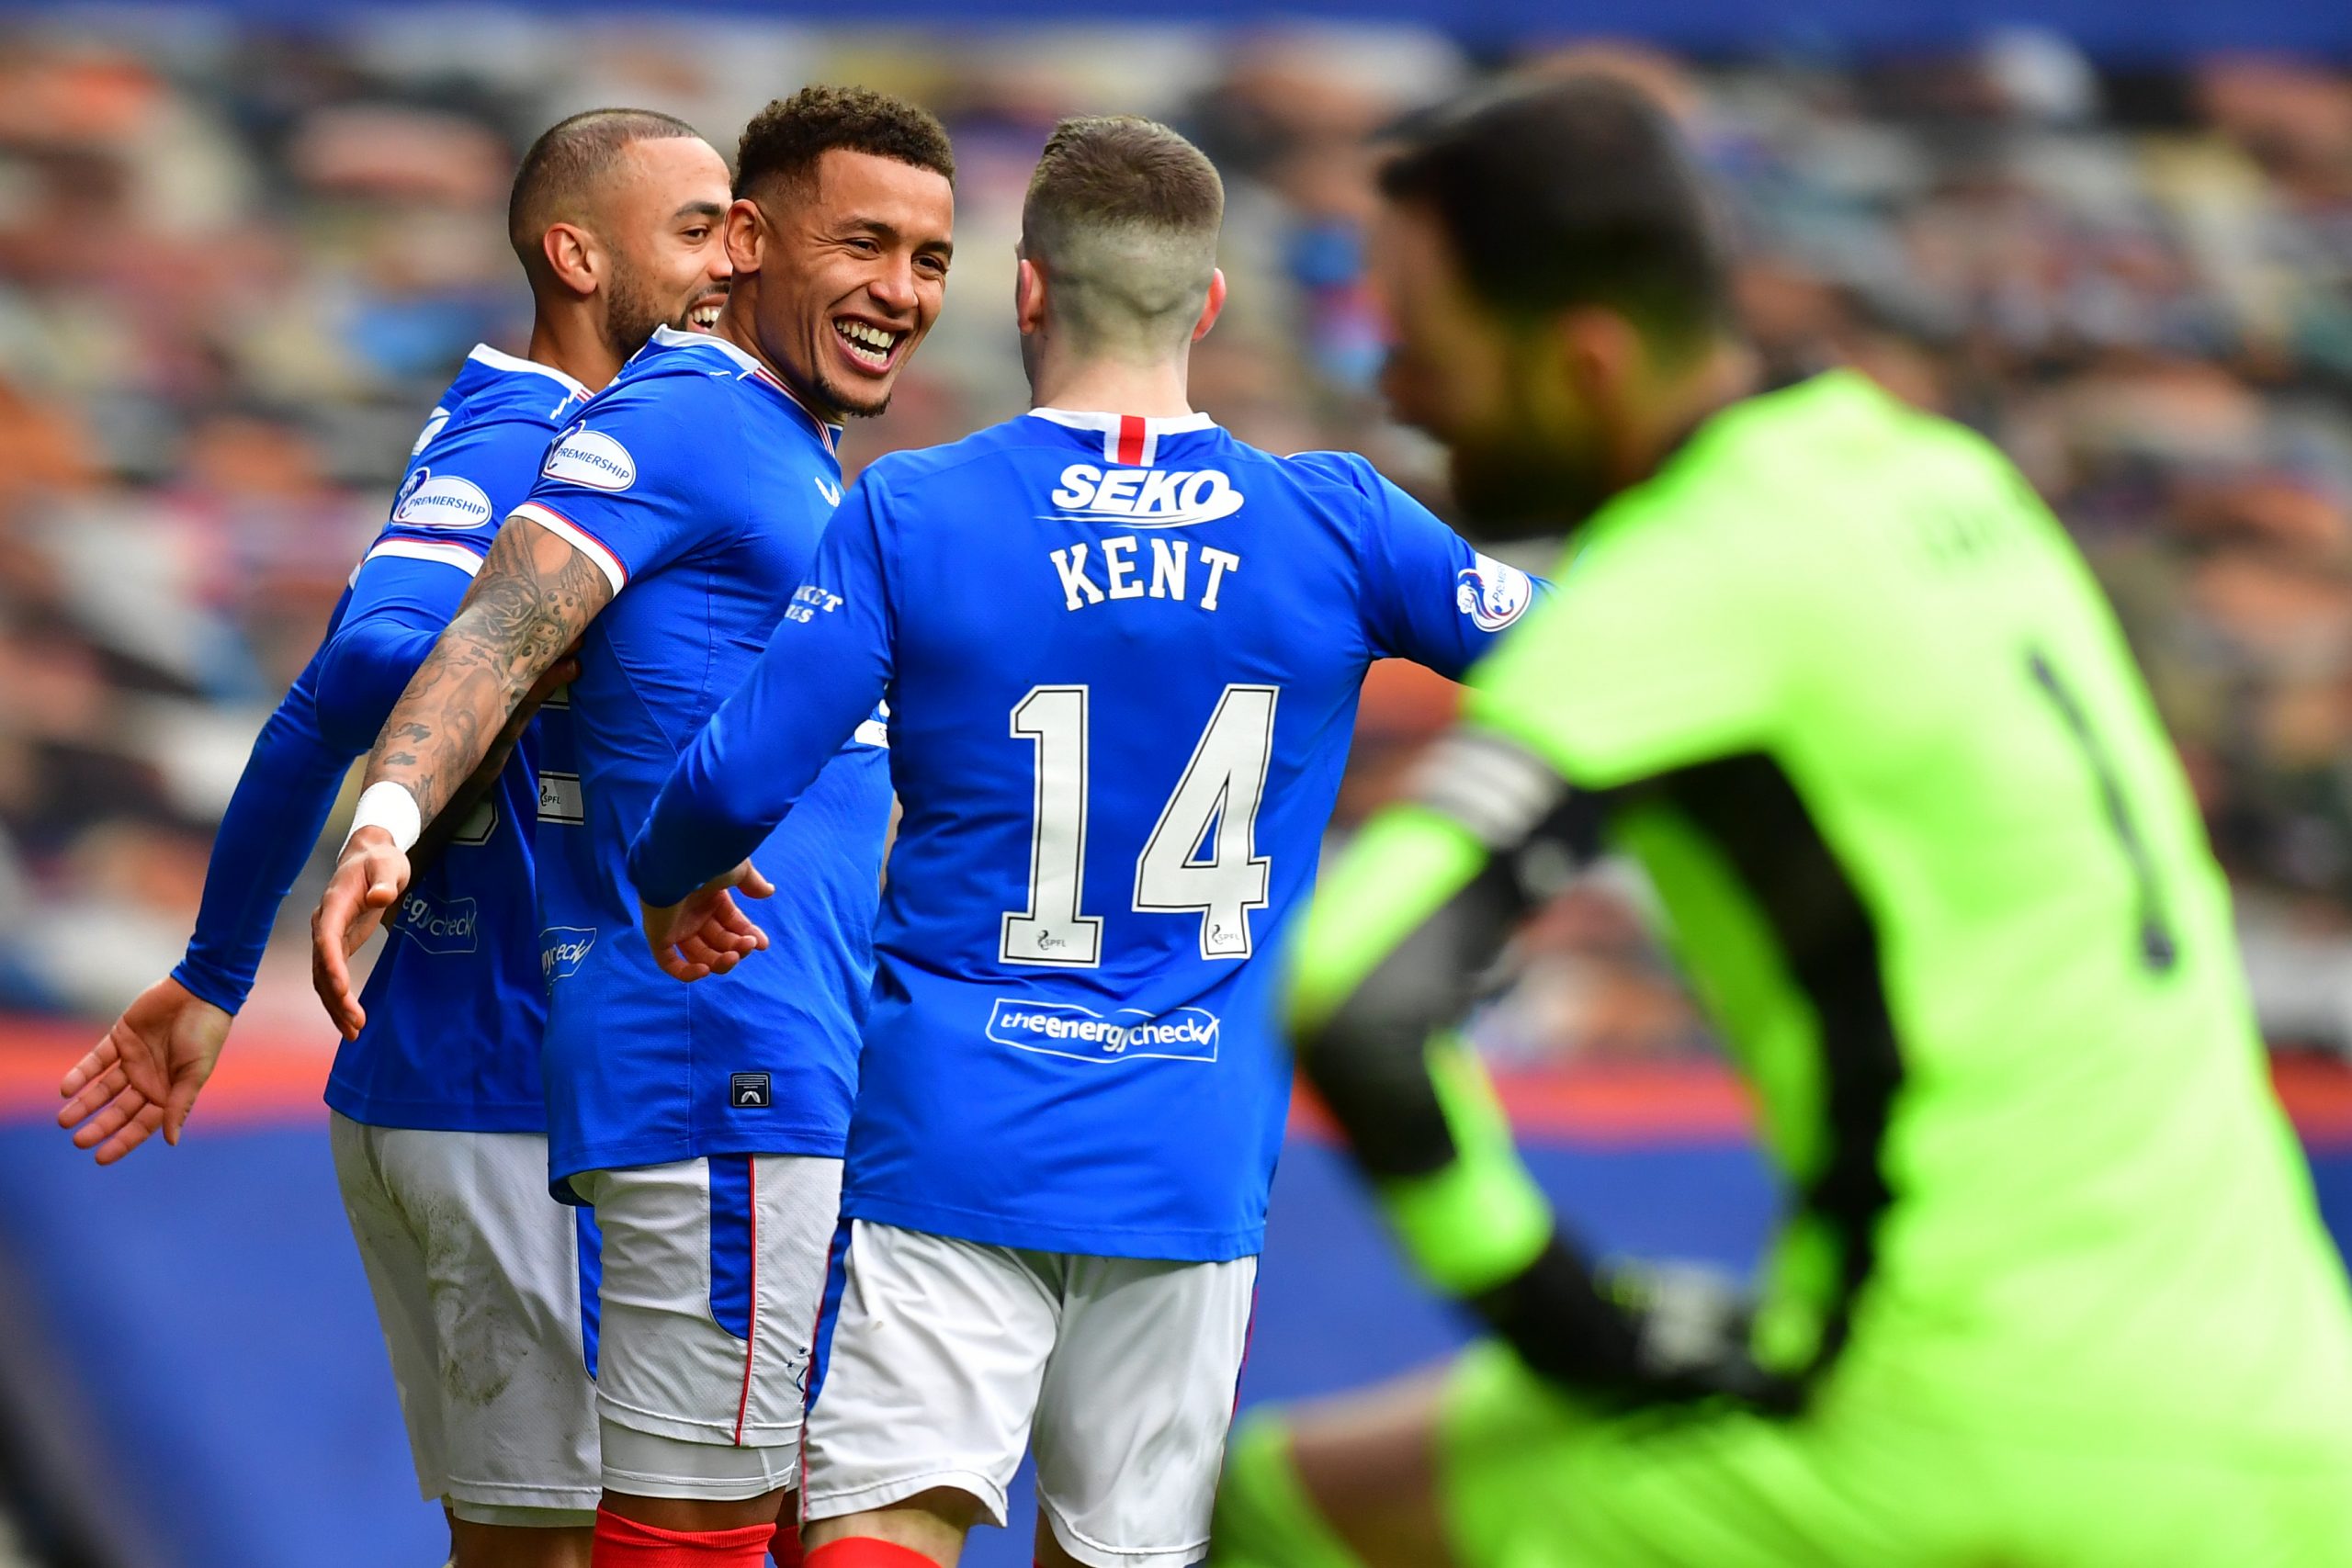 GLASGOW, SCOTLAND - NOVEMBER 22: James Tavernier of Rangers(2L) celebrates after scoring their sides fourth goal from the penalty spot during the Ladbrokes Scottish Premiership match between Rangers and Aberdeen at Ibrox Stadium on November 22, 2020 in Glasgow, Scotland. Sporting stadiums around the UK remain under strict restrictions due to the Coronavirus Pandemic as Government social distancing laws prohibit fans inside venues resulting in games being played behind closed doors. (Photo by Mark Runnacles/Getty Images)